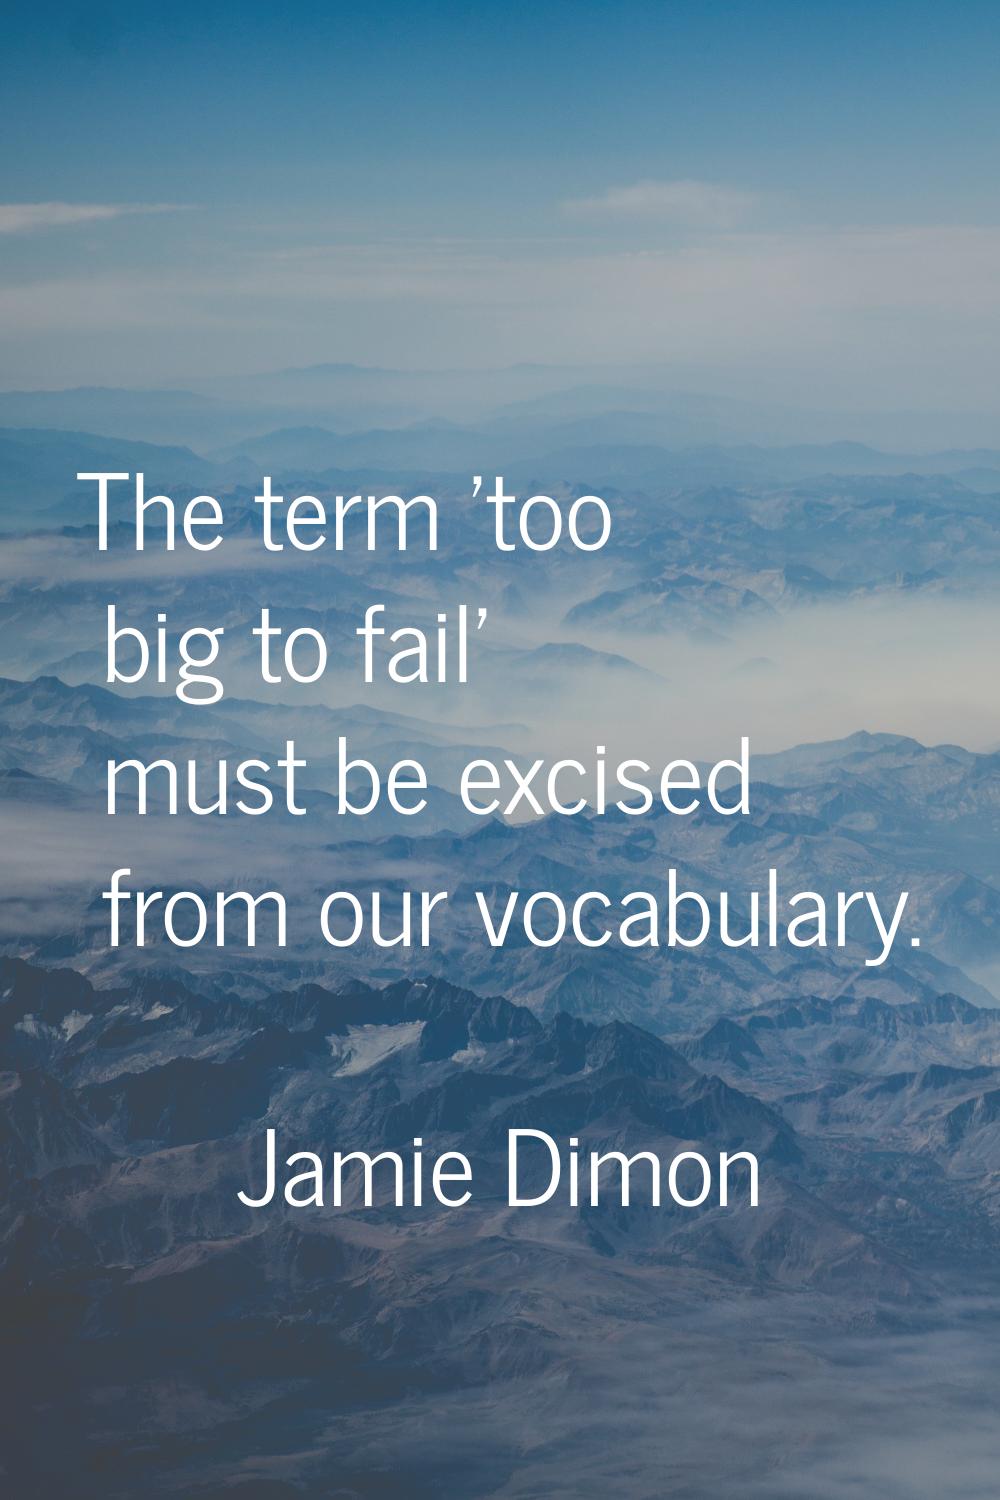 The term 'too big to fail' must be excised from our vocabulary.